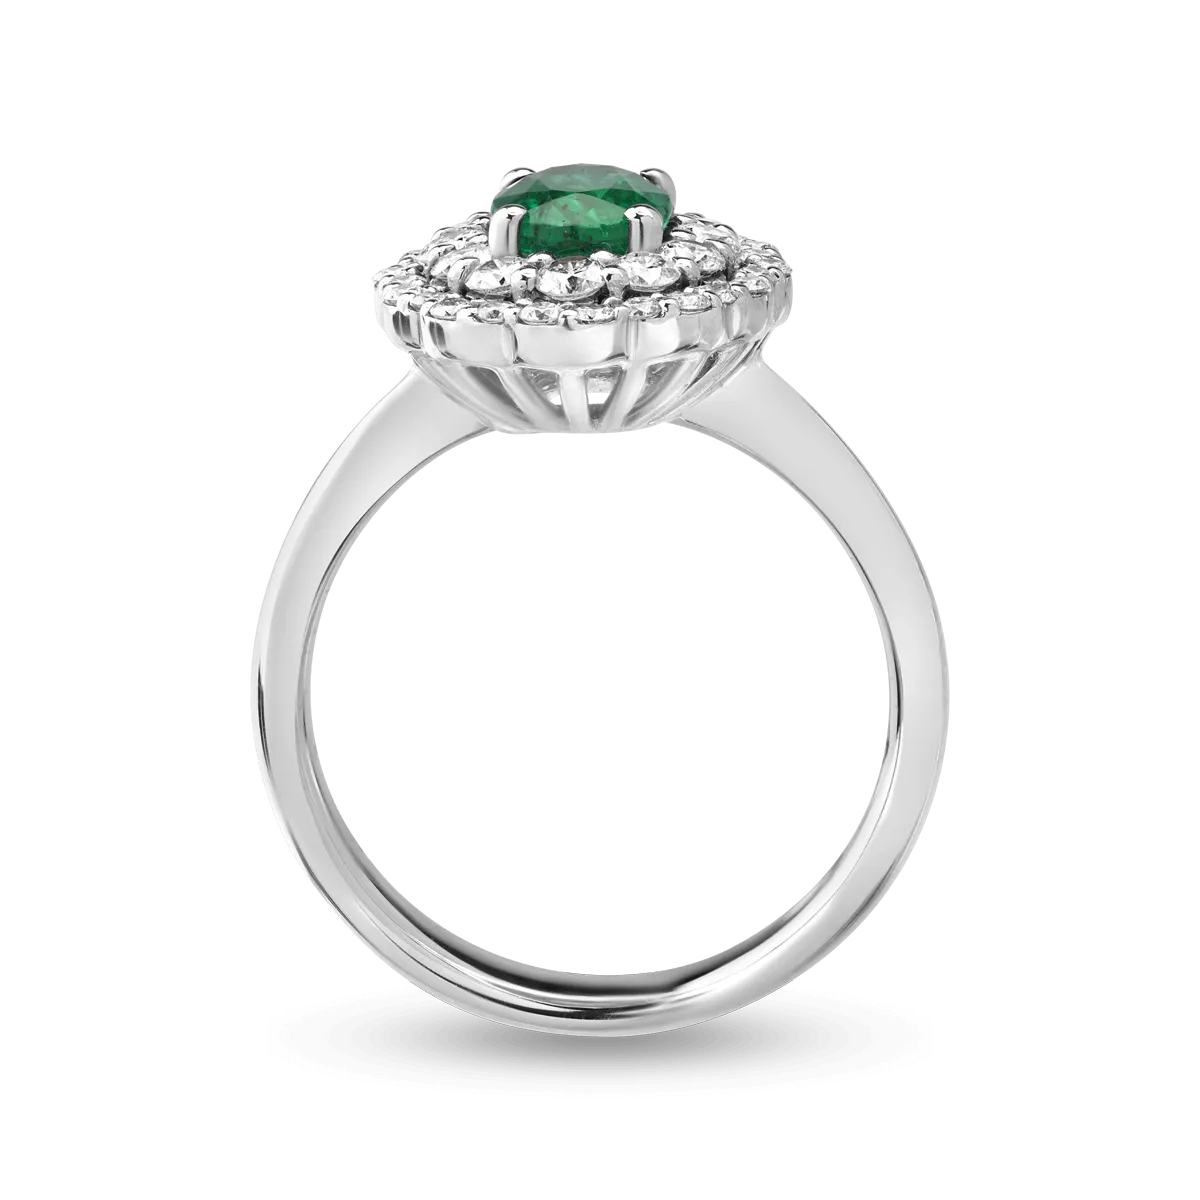 18K white gold ring with 0.66ct emerald and 0.56ct diamonds